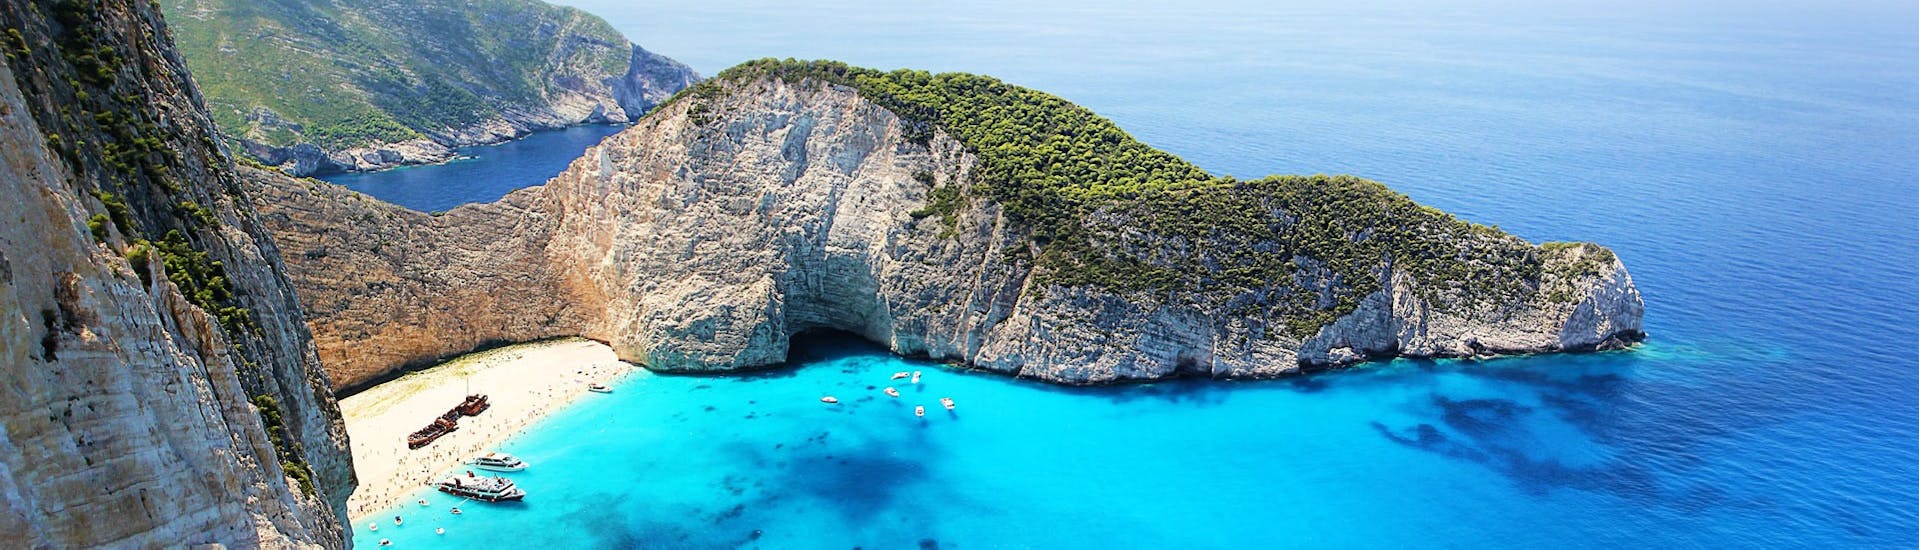 View of Shipwreck Beach during Early Morning Minivan & Boat Trip to Shipwreck Beach & Blue Caves by Dali Tours Zakynthos.